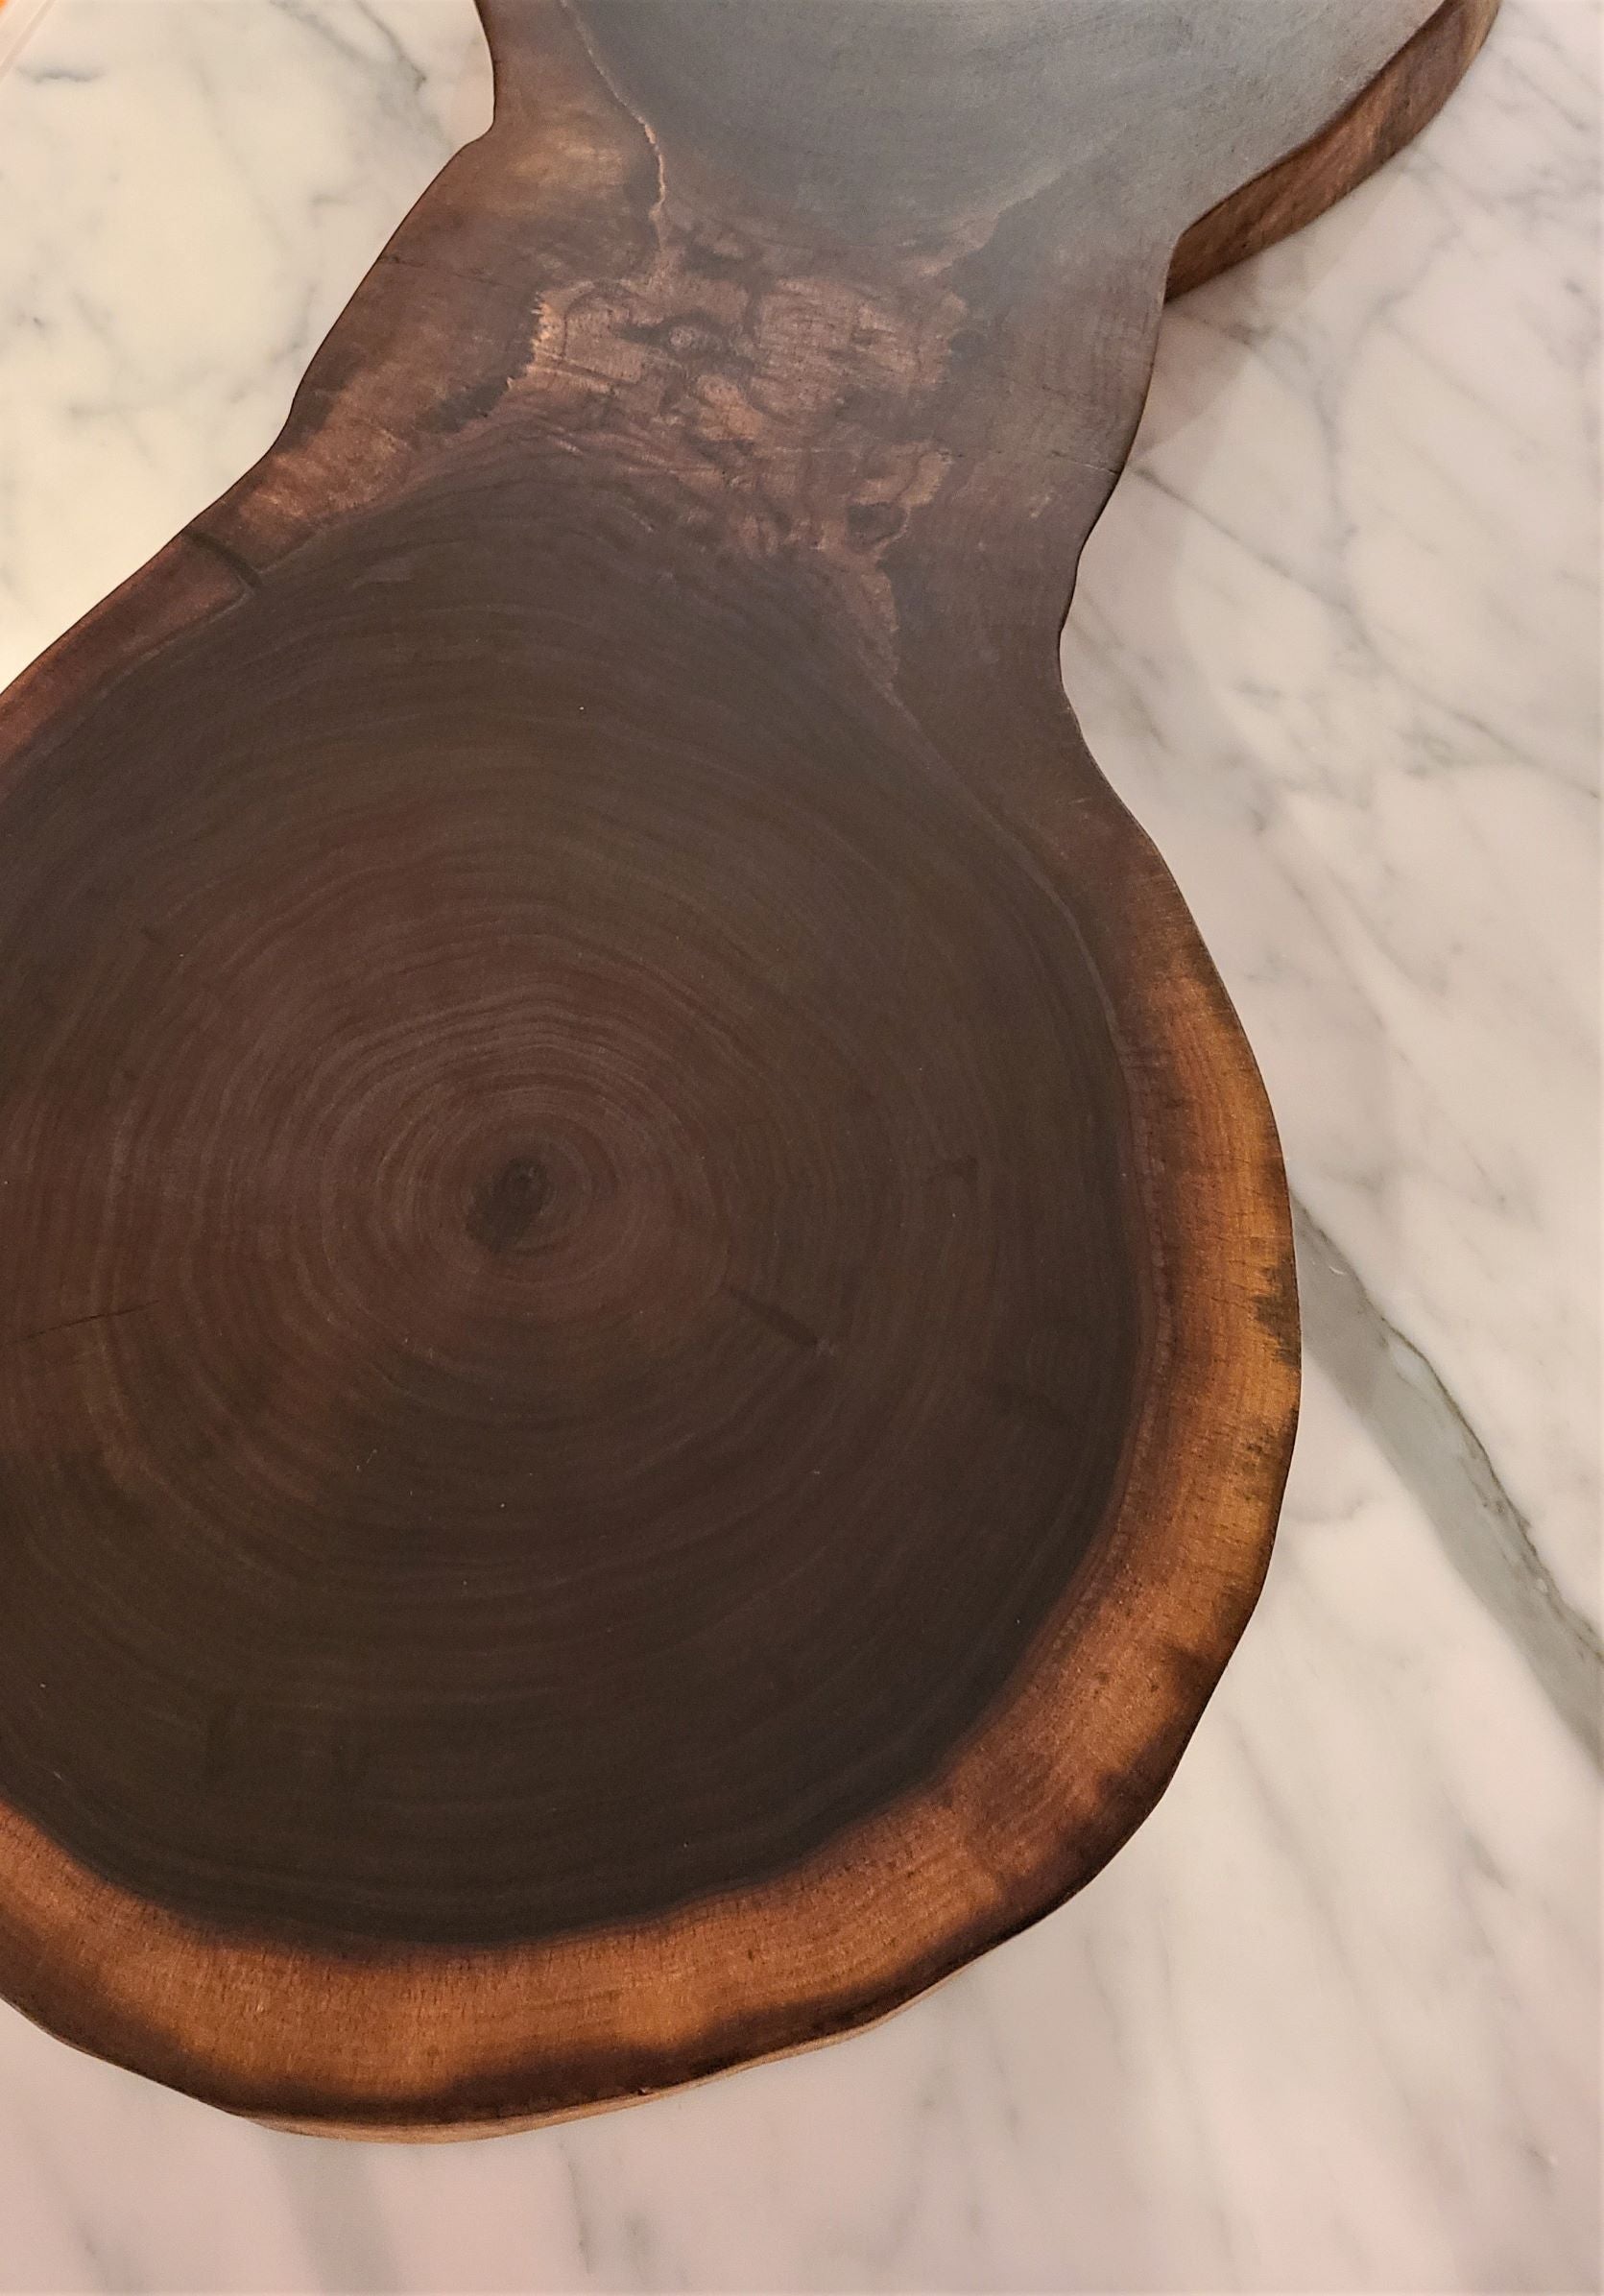 Black Walnut double cross-cut Charcuterie/grazing/serving wood cutting board.  Made in Lancaster Pennsylvania USA by ZimBOARDS